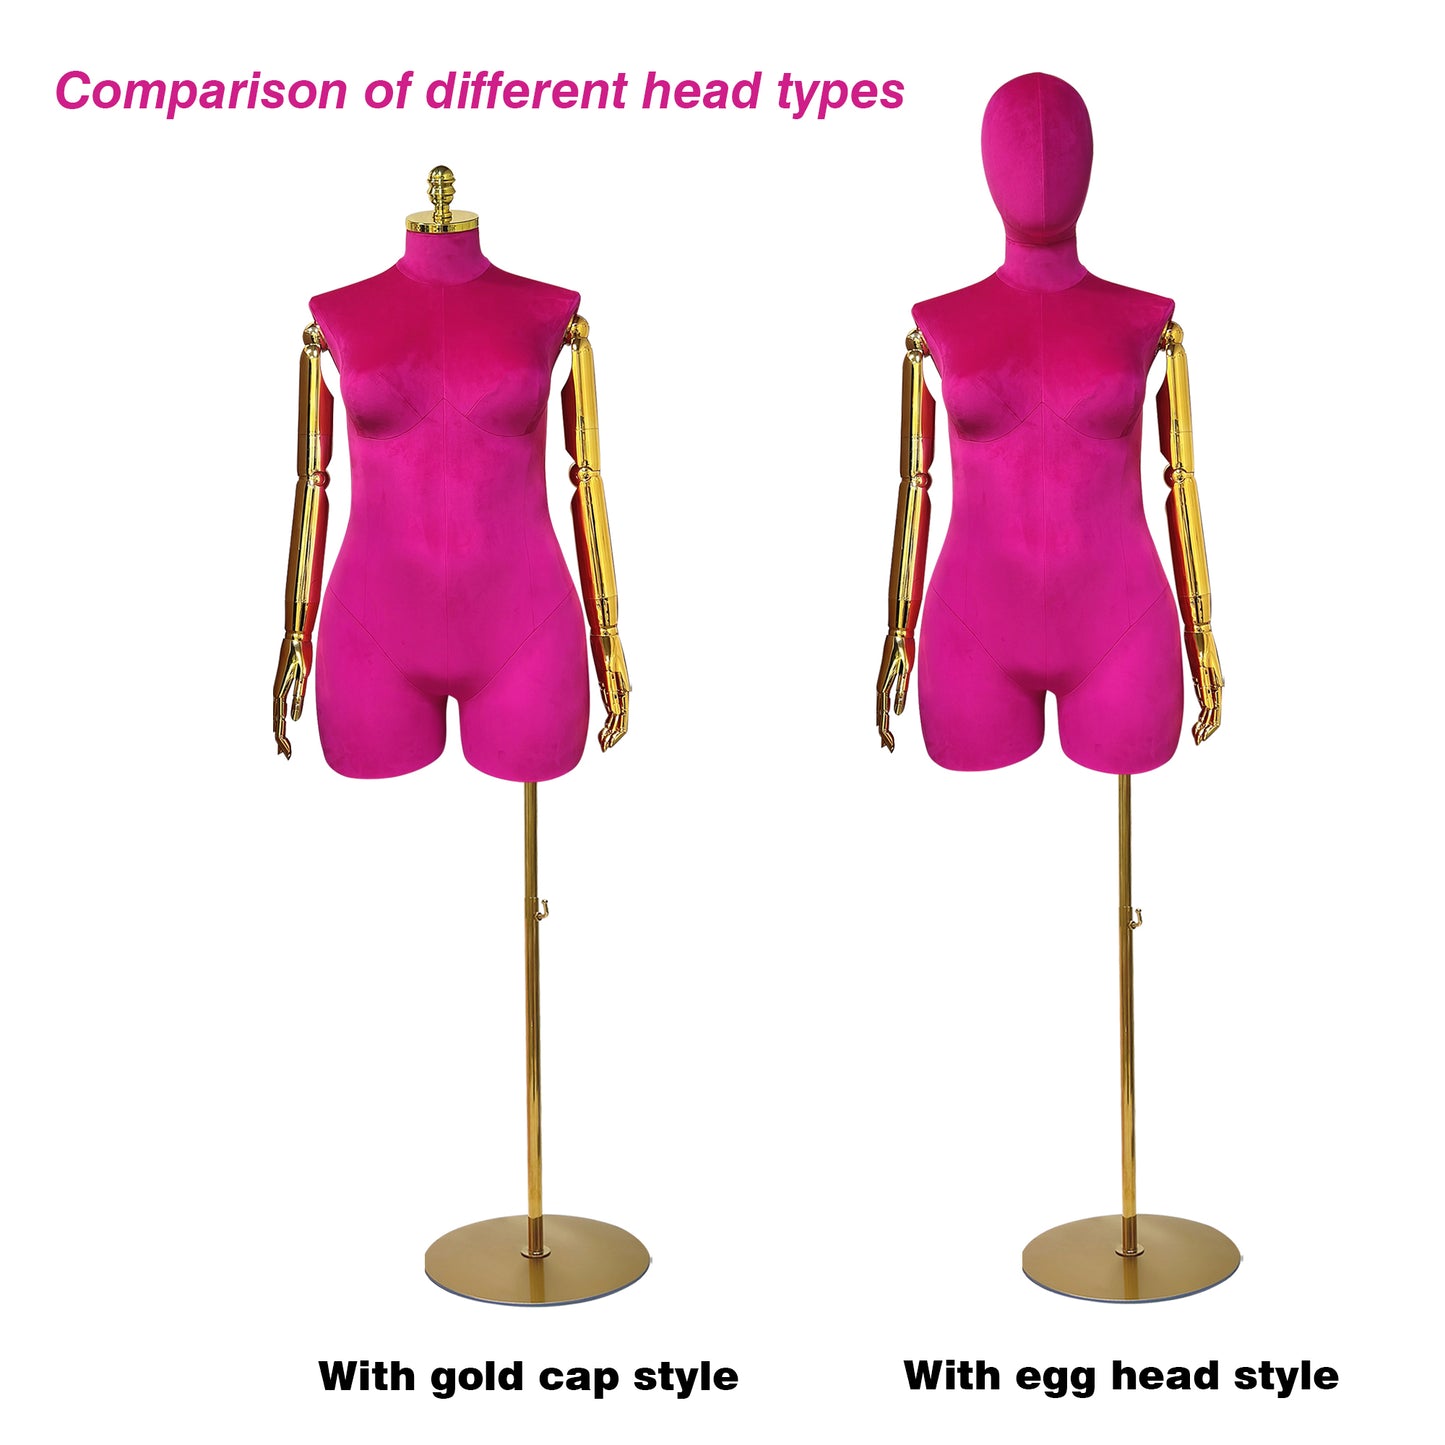 Jelimate Luxury Plus Size Female Mannequin Torso With Gold Arms,Half Body Women Dress Form Velvet Display Mannequin,Plus Size Dress Form Model JM375